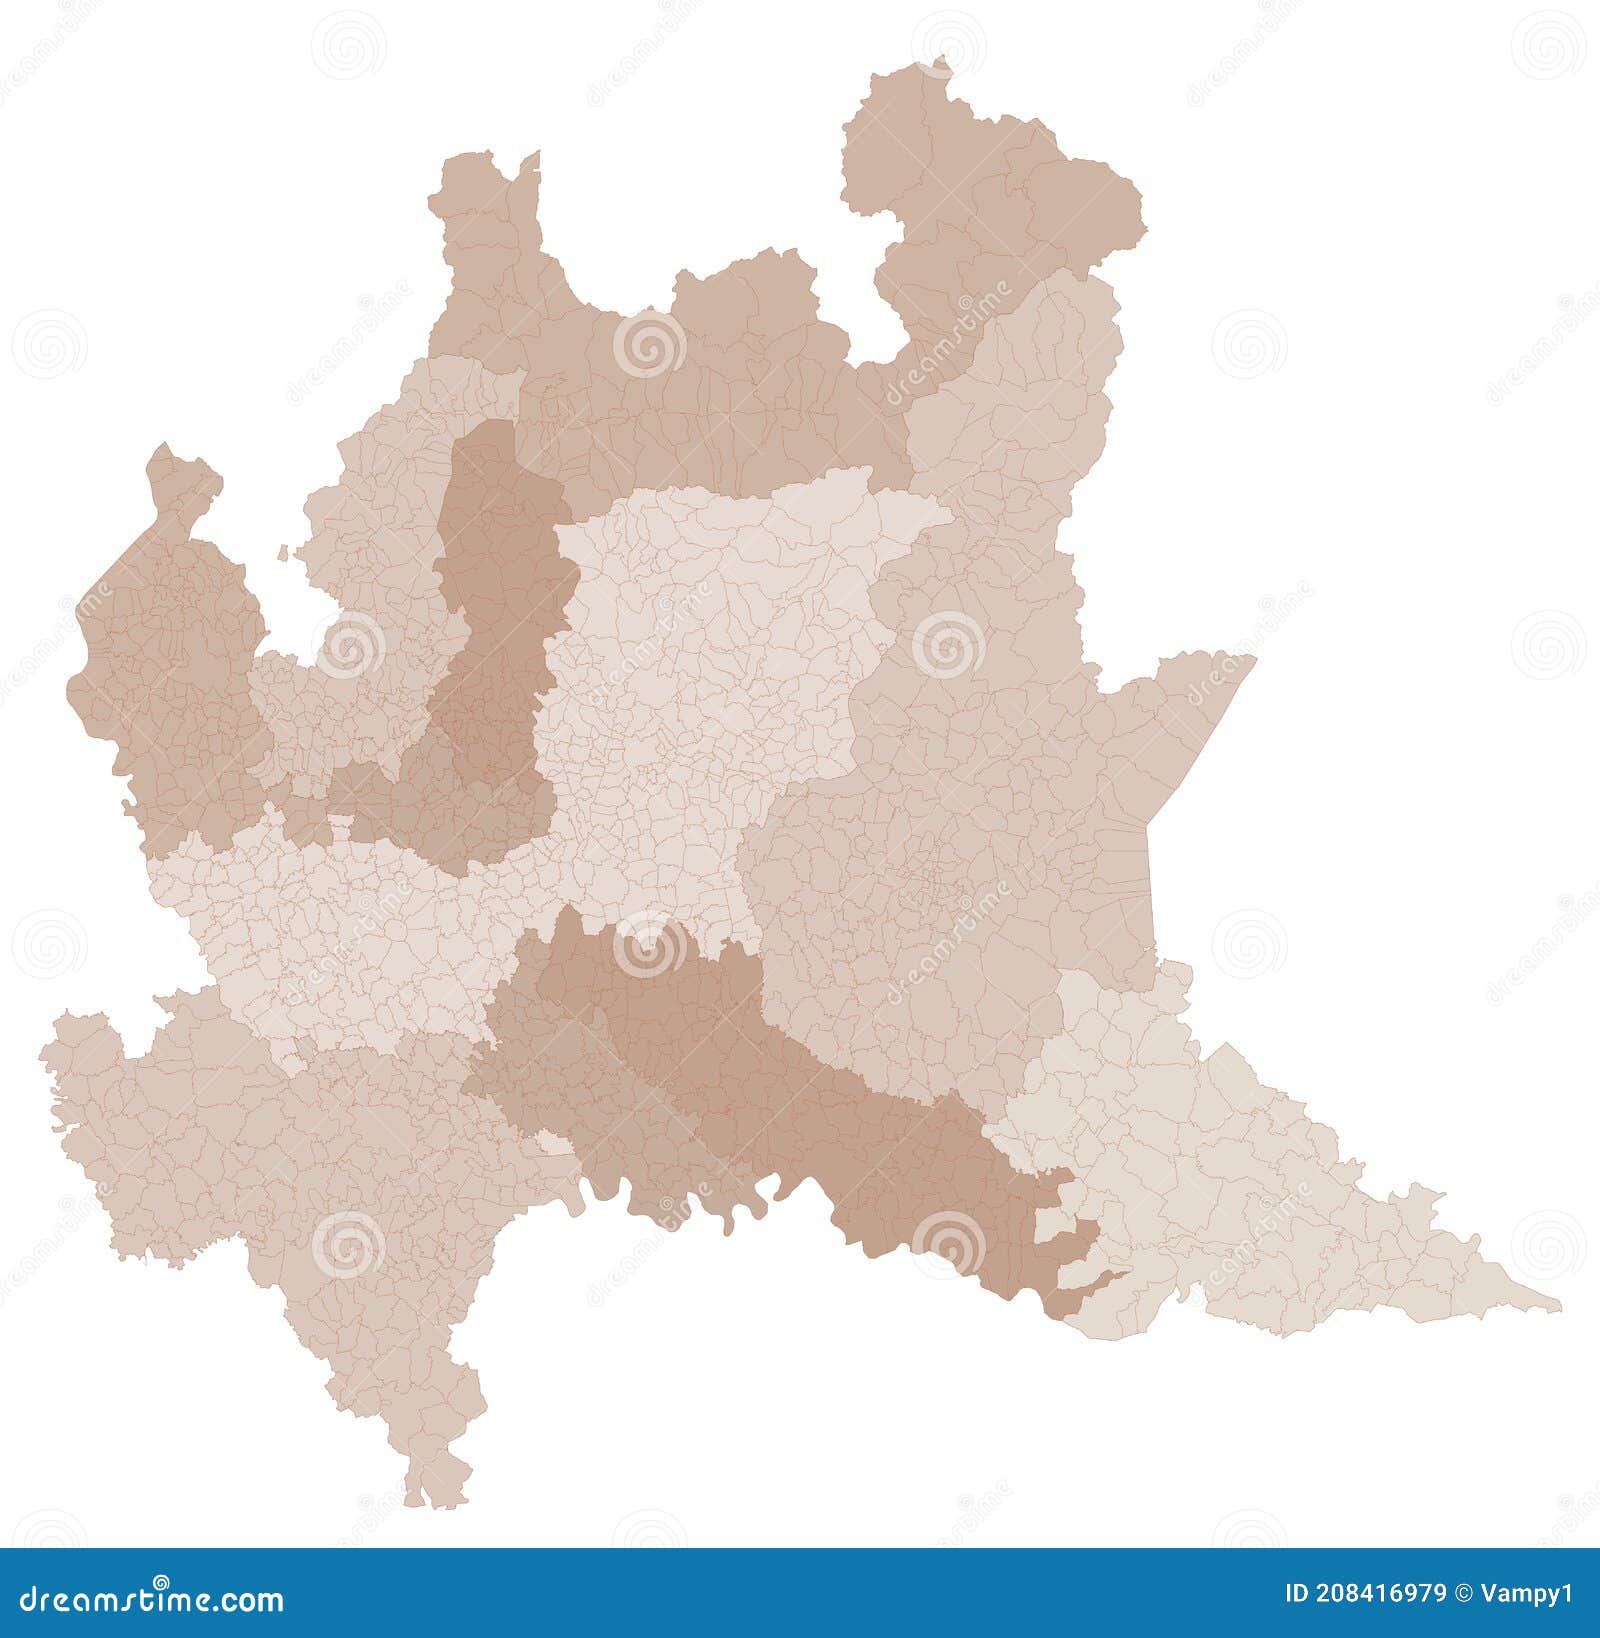 lombardy map division by provinces and municipalities. closed and perfectly editable polygons polygon fill and color paths editabl